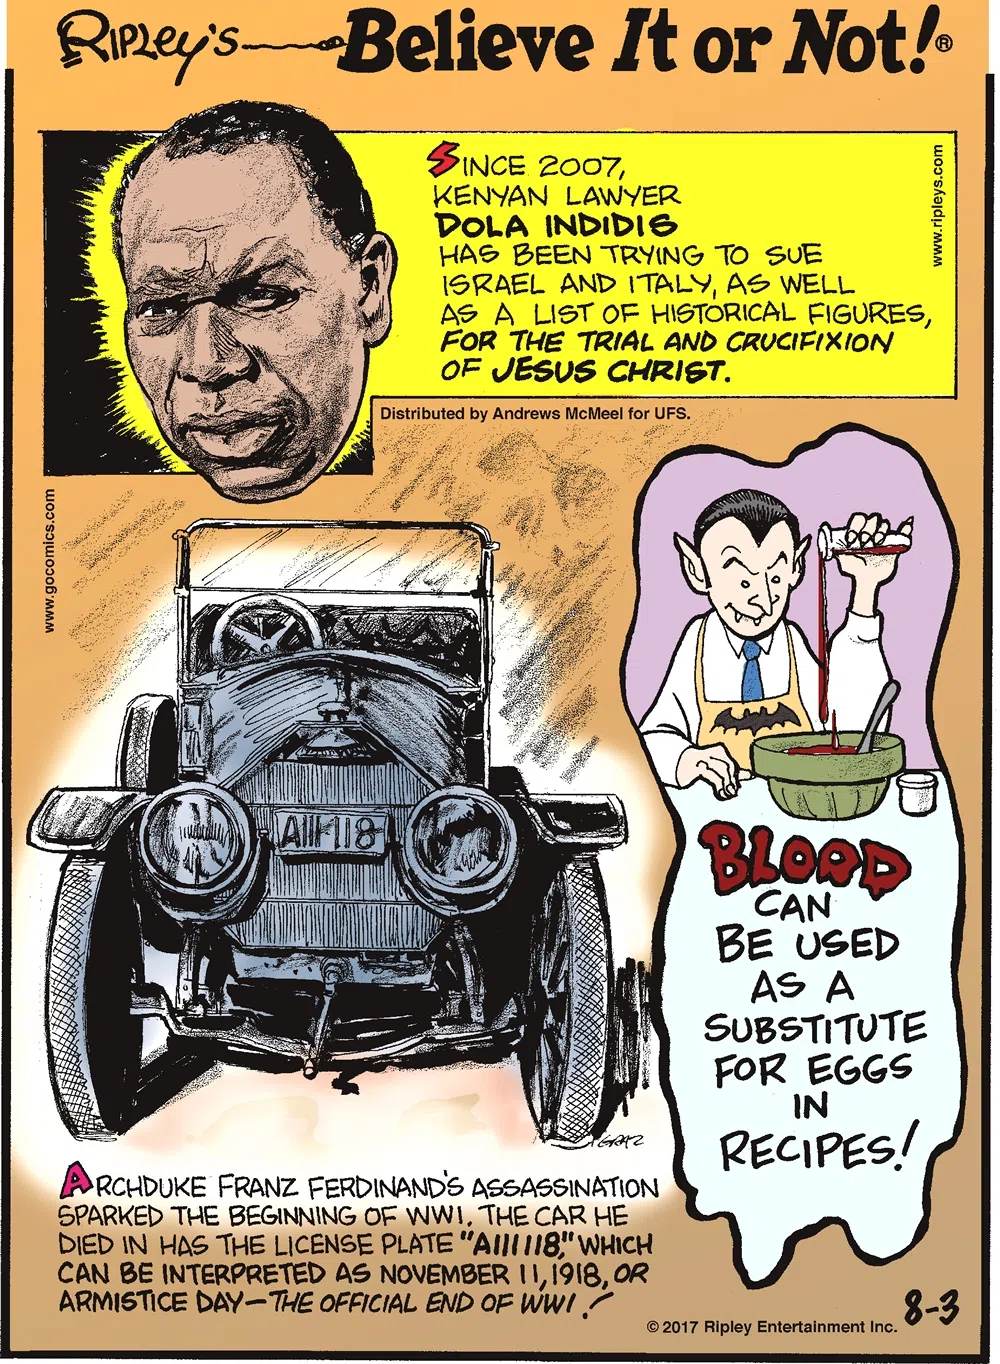 Since 2007, Kenyan lawyer Dola Indidis has been trying to sue Israel and Italy, as well as a list of historical figures, for the trial and crucifixion of Jesus Christ.-------------------- Archduke Franz Ferdinand's assassination sparked the beginning of WWI. The car he died in has the license plate "A111118,"which can be interpreted as November 11,1918, or Armistice Day - the official end of WWI!-------------------- Blood can be used as a substitute for eggs in recipes!